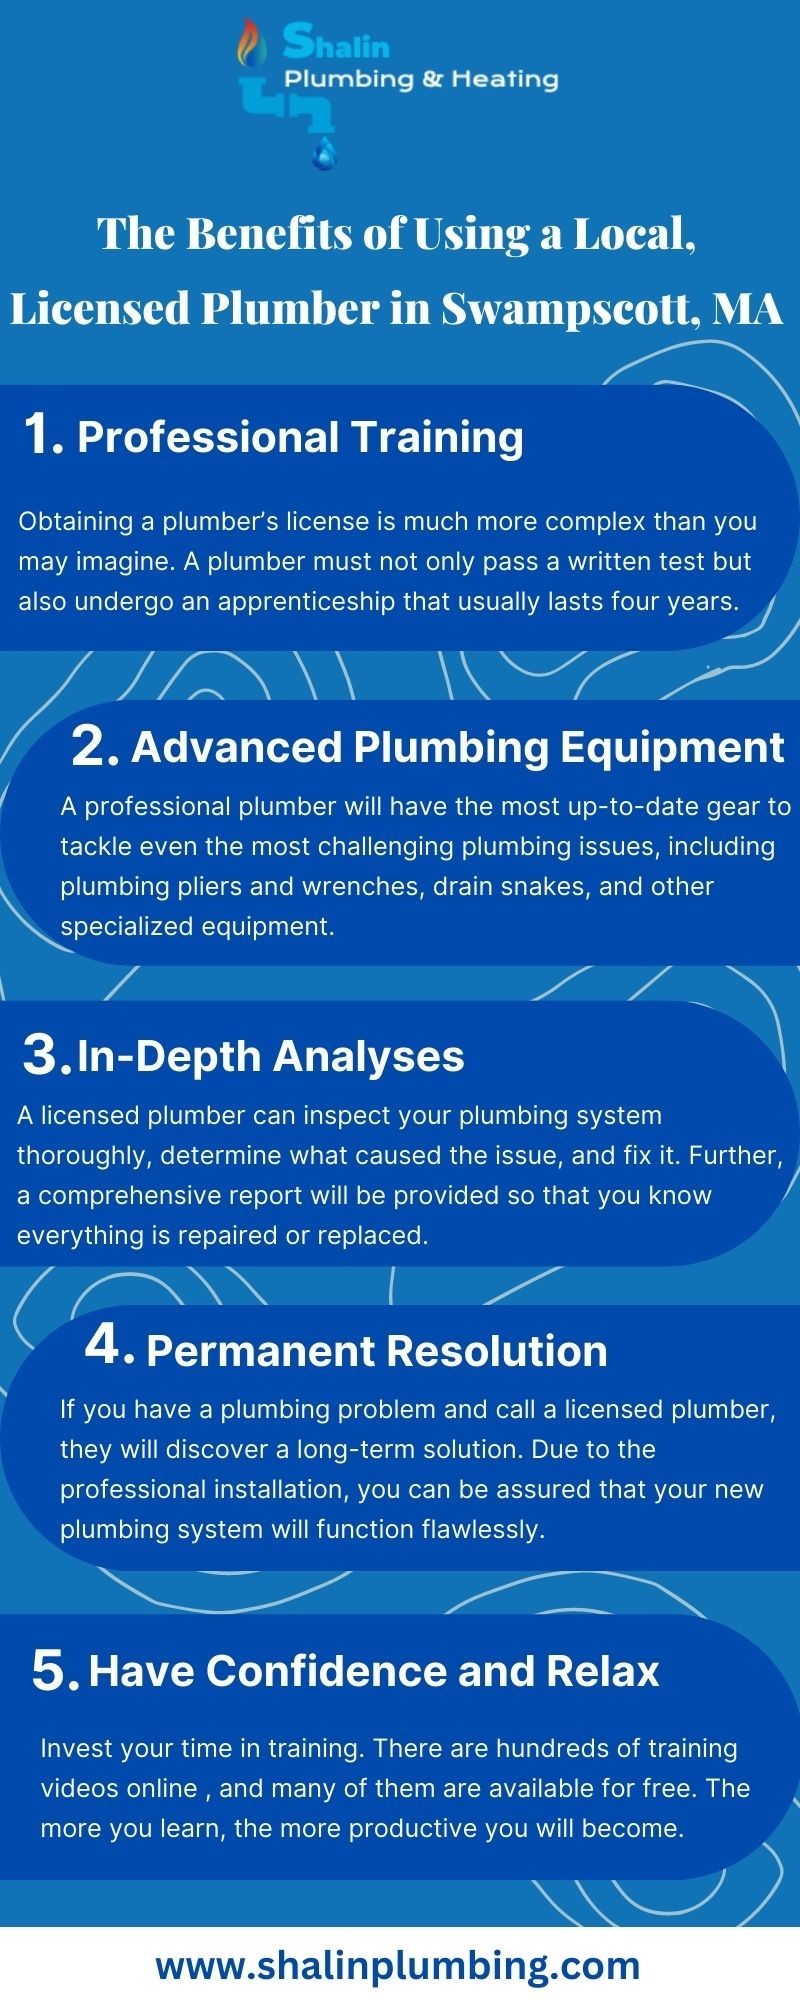 The Benefits of Using a Local, Licensed Plumber in Swampscott MA